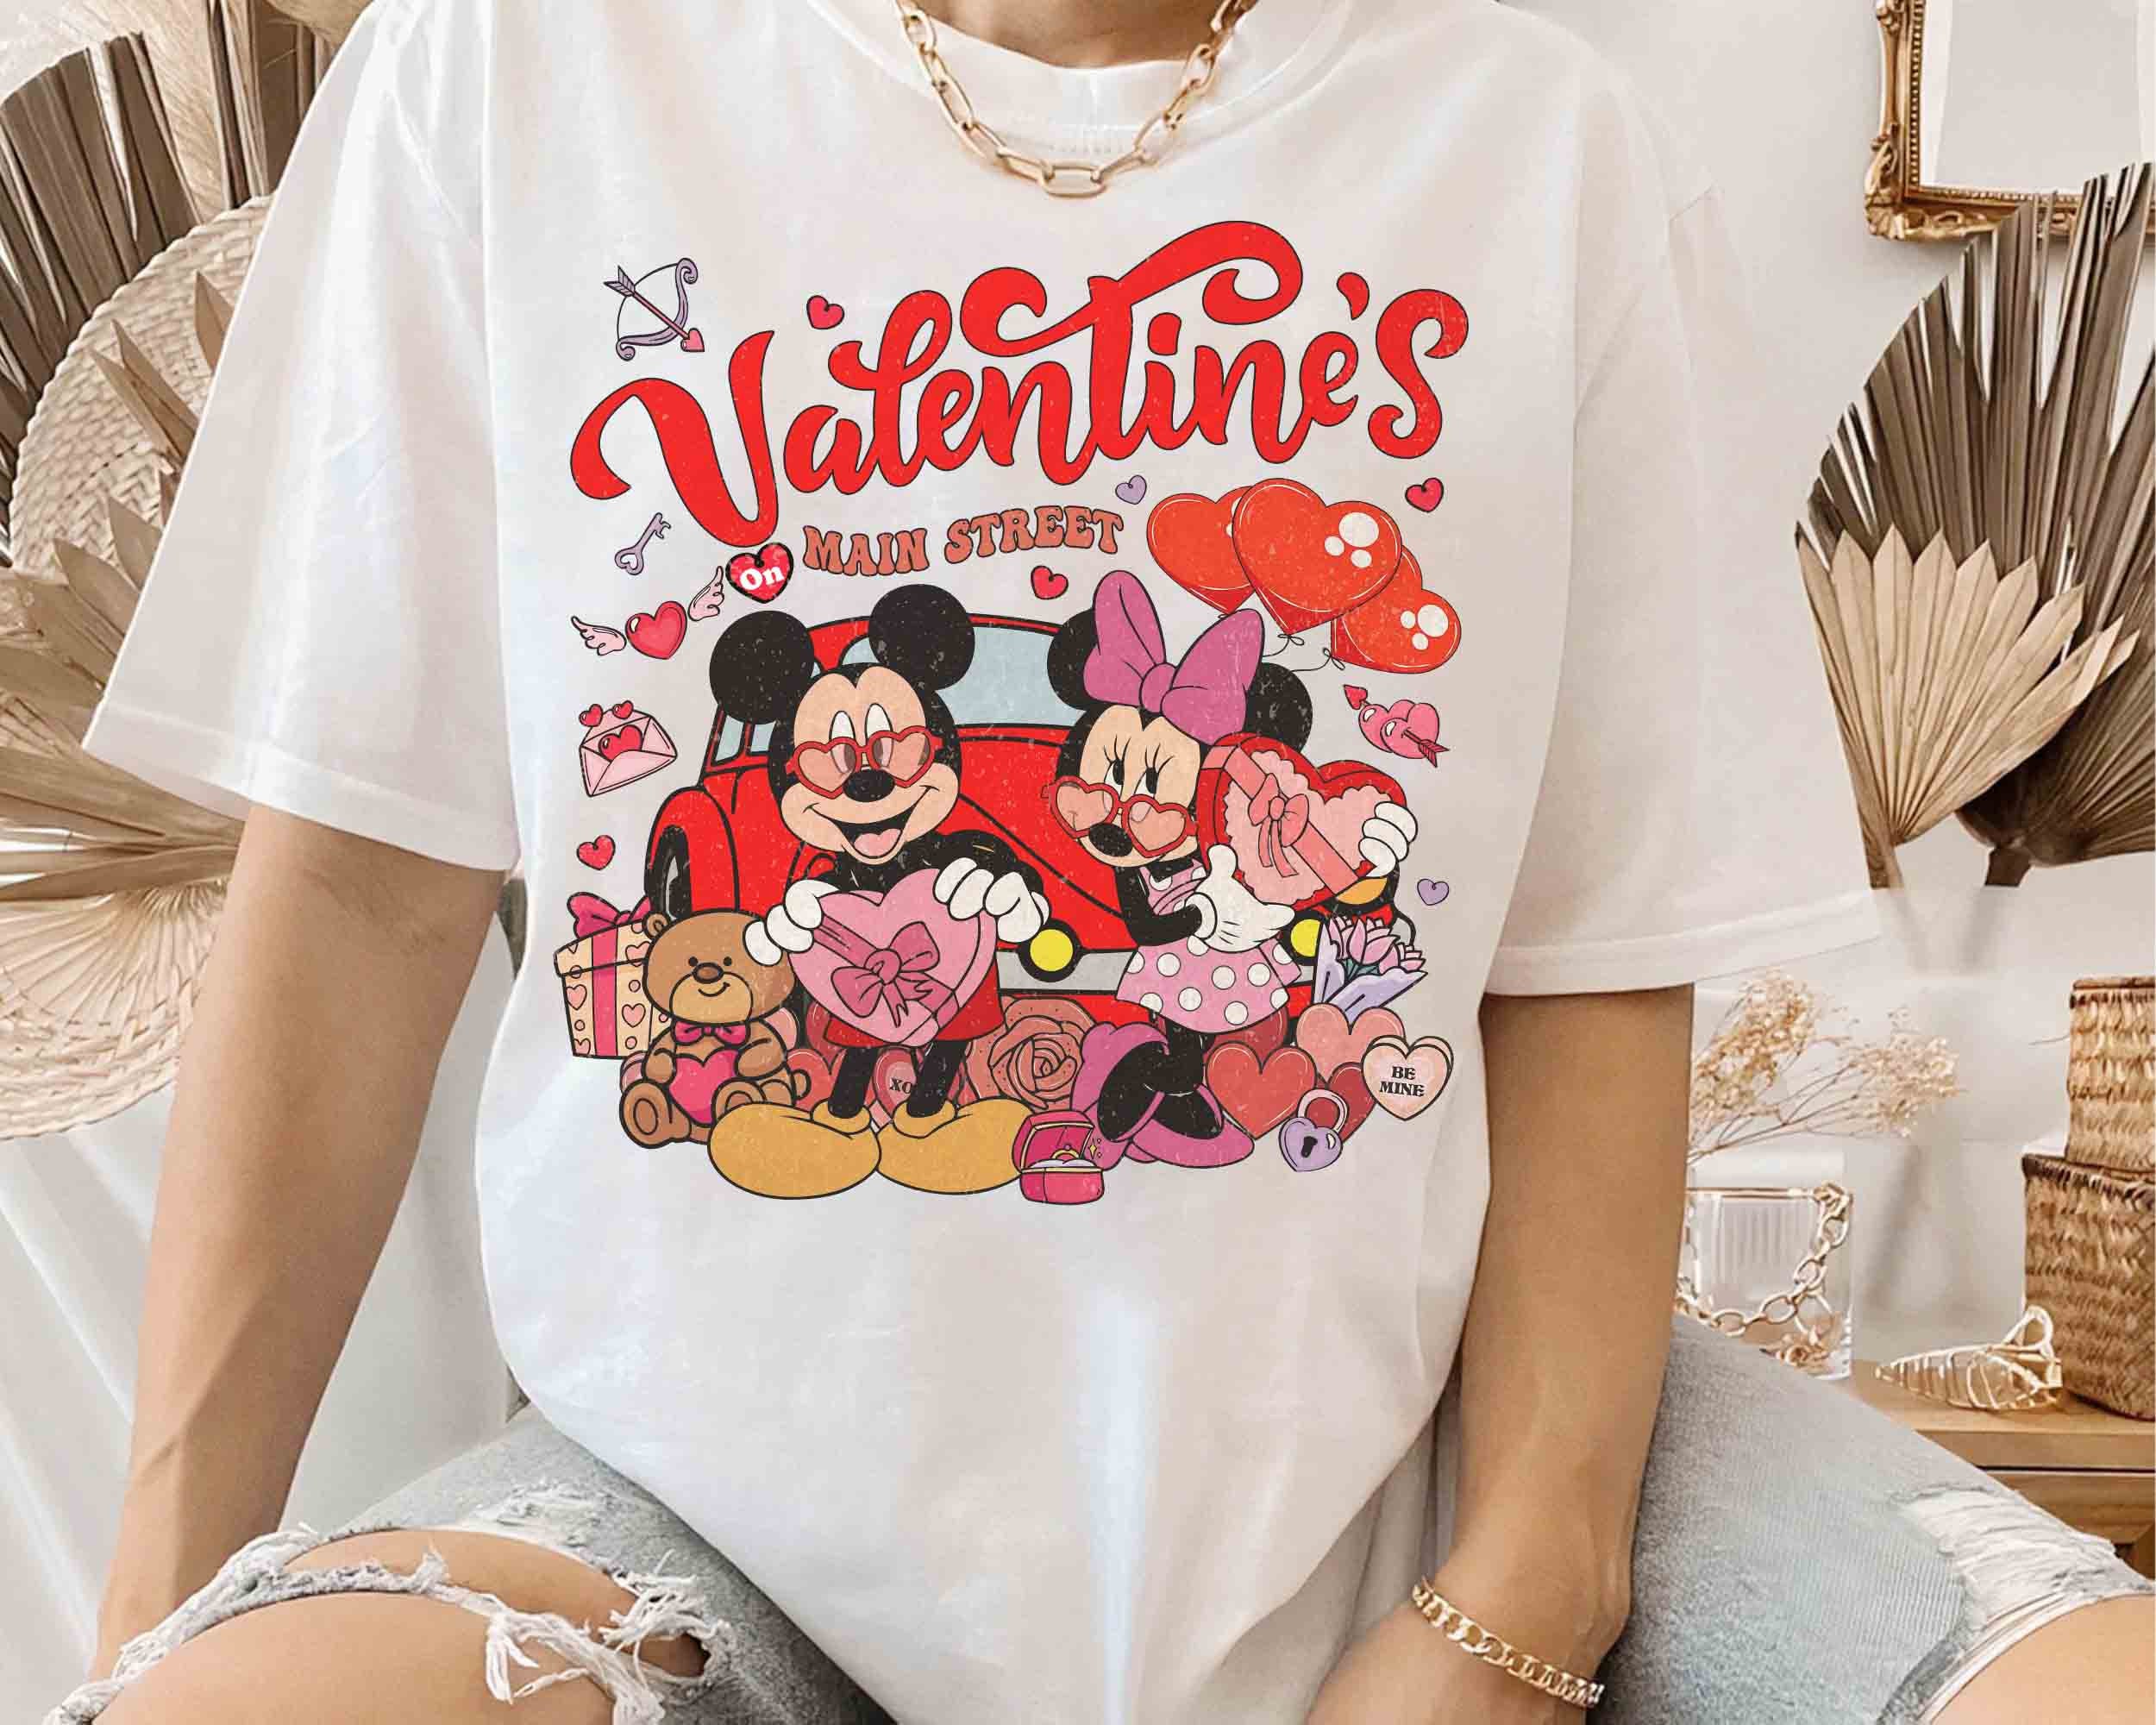 Funny Drinking Disney Couple Shirt | Best Valentine Gift Ideas For Mickey  And Minnie Lovers - Family Christmas Pajamas By Jenny